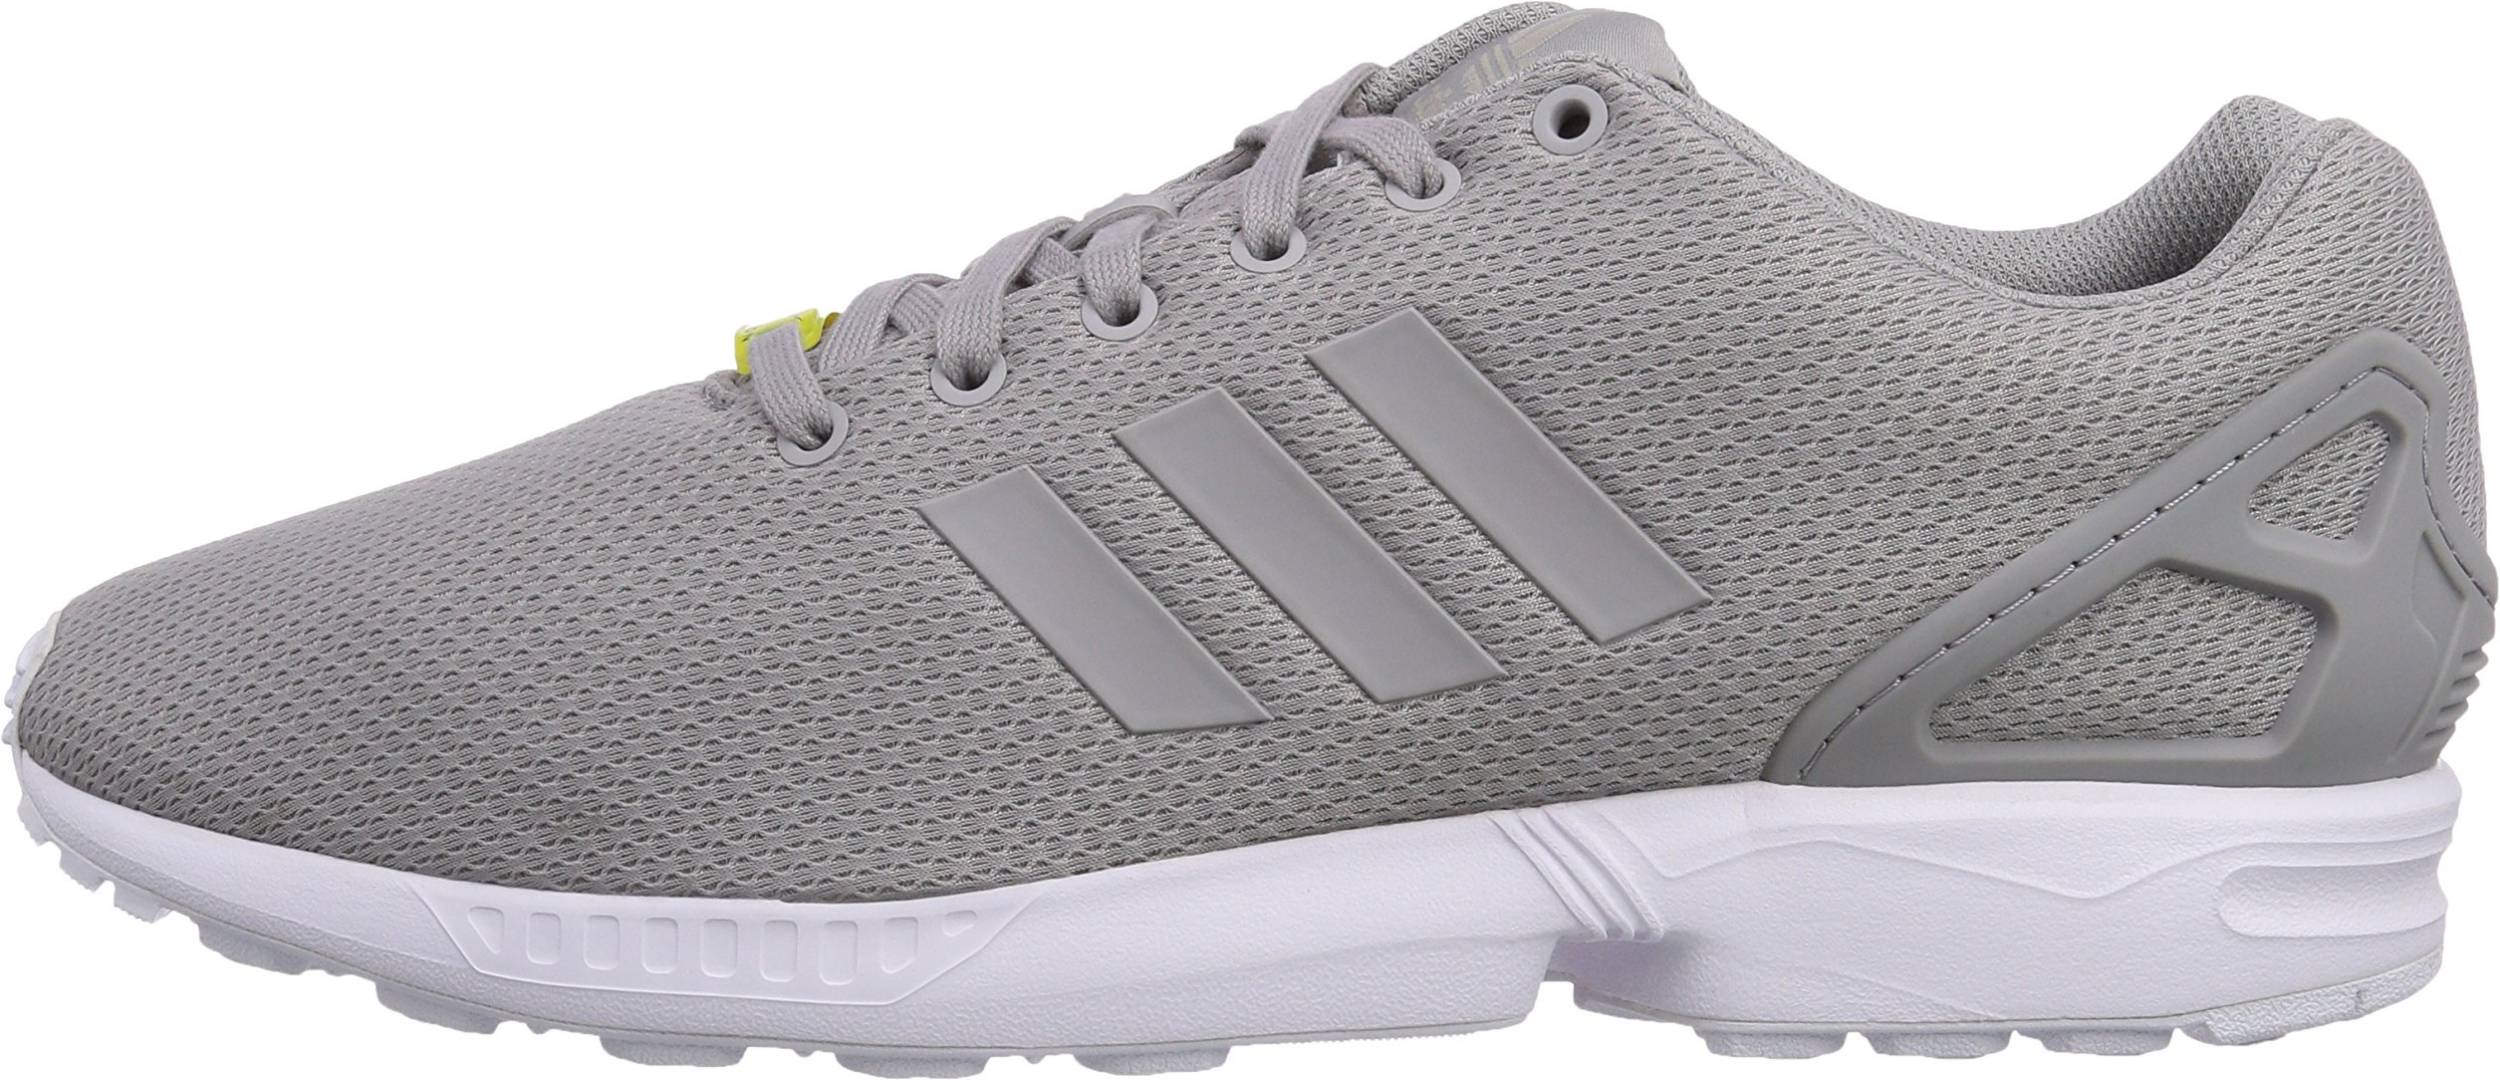 Adidas ZX Flux sneakers in 20+ colors (only $25) | RunRepeat قنديل البحر